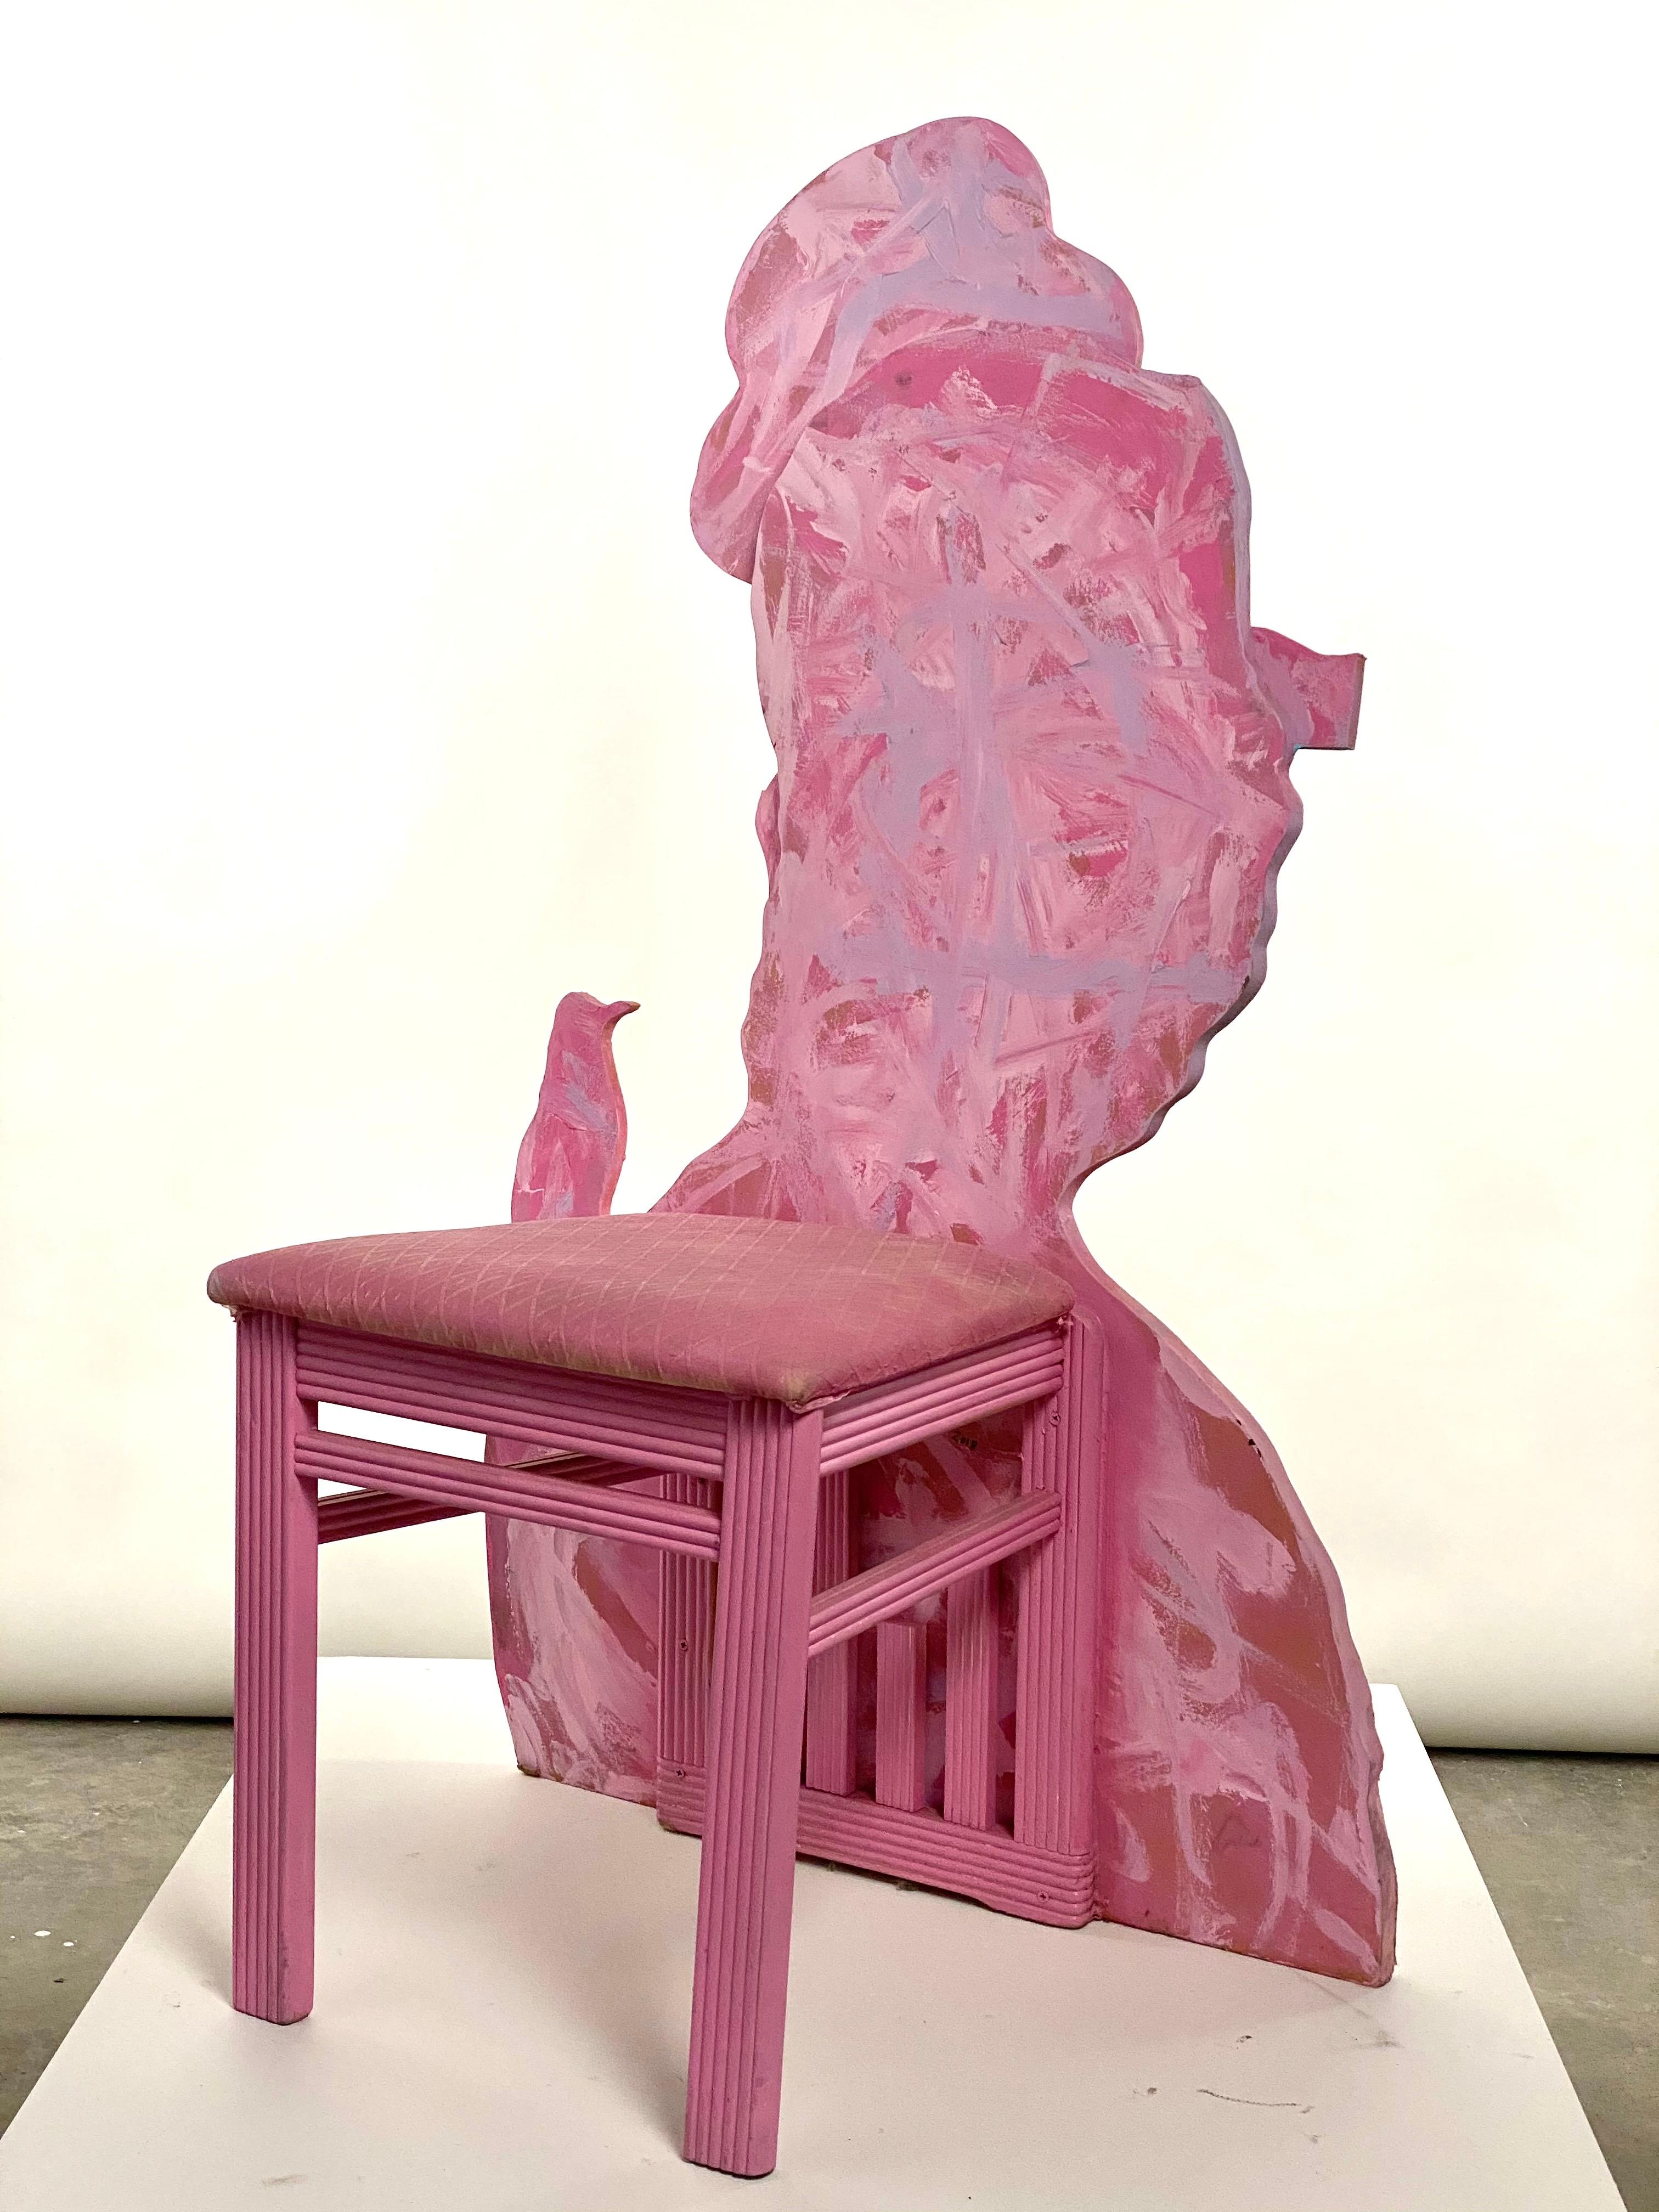 This is a new work by Mattia Biagi
Sculptural chair with collage on wood.
 